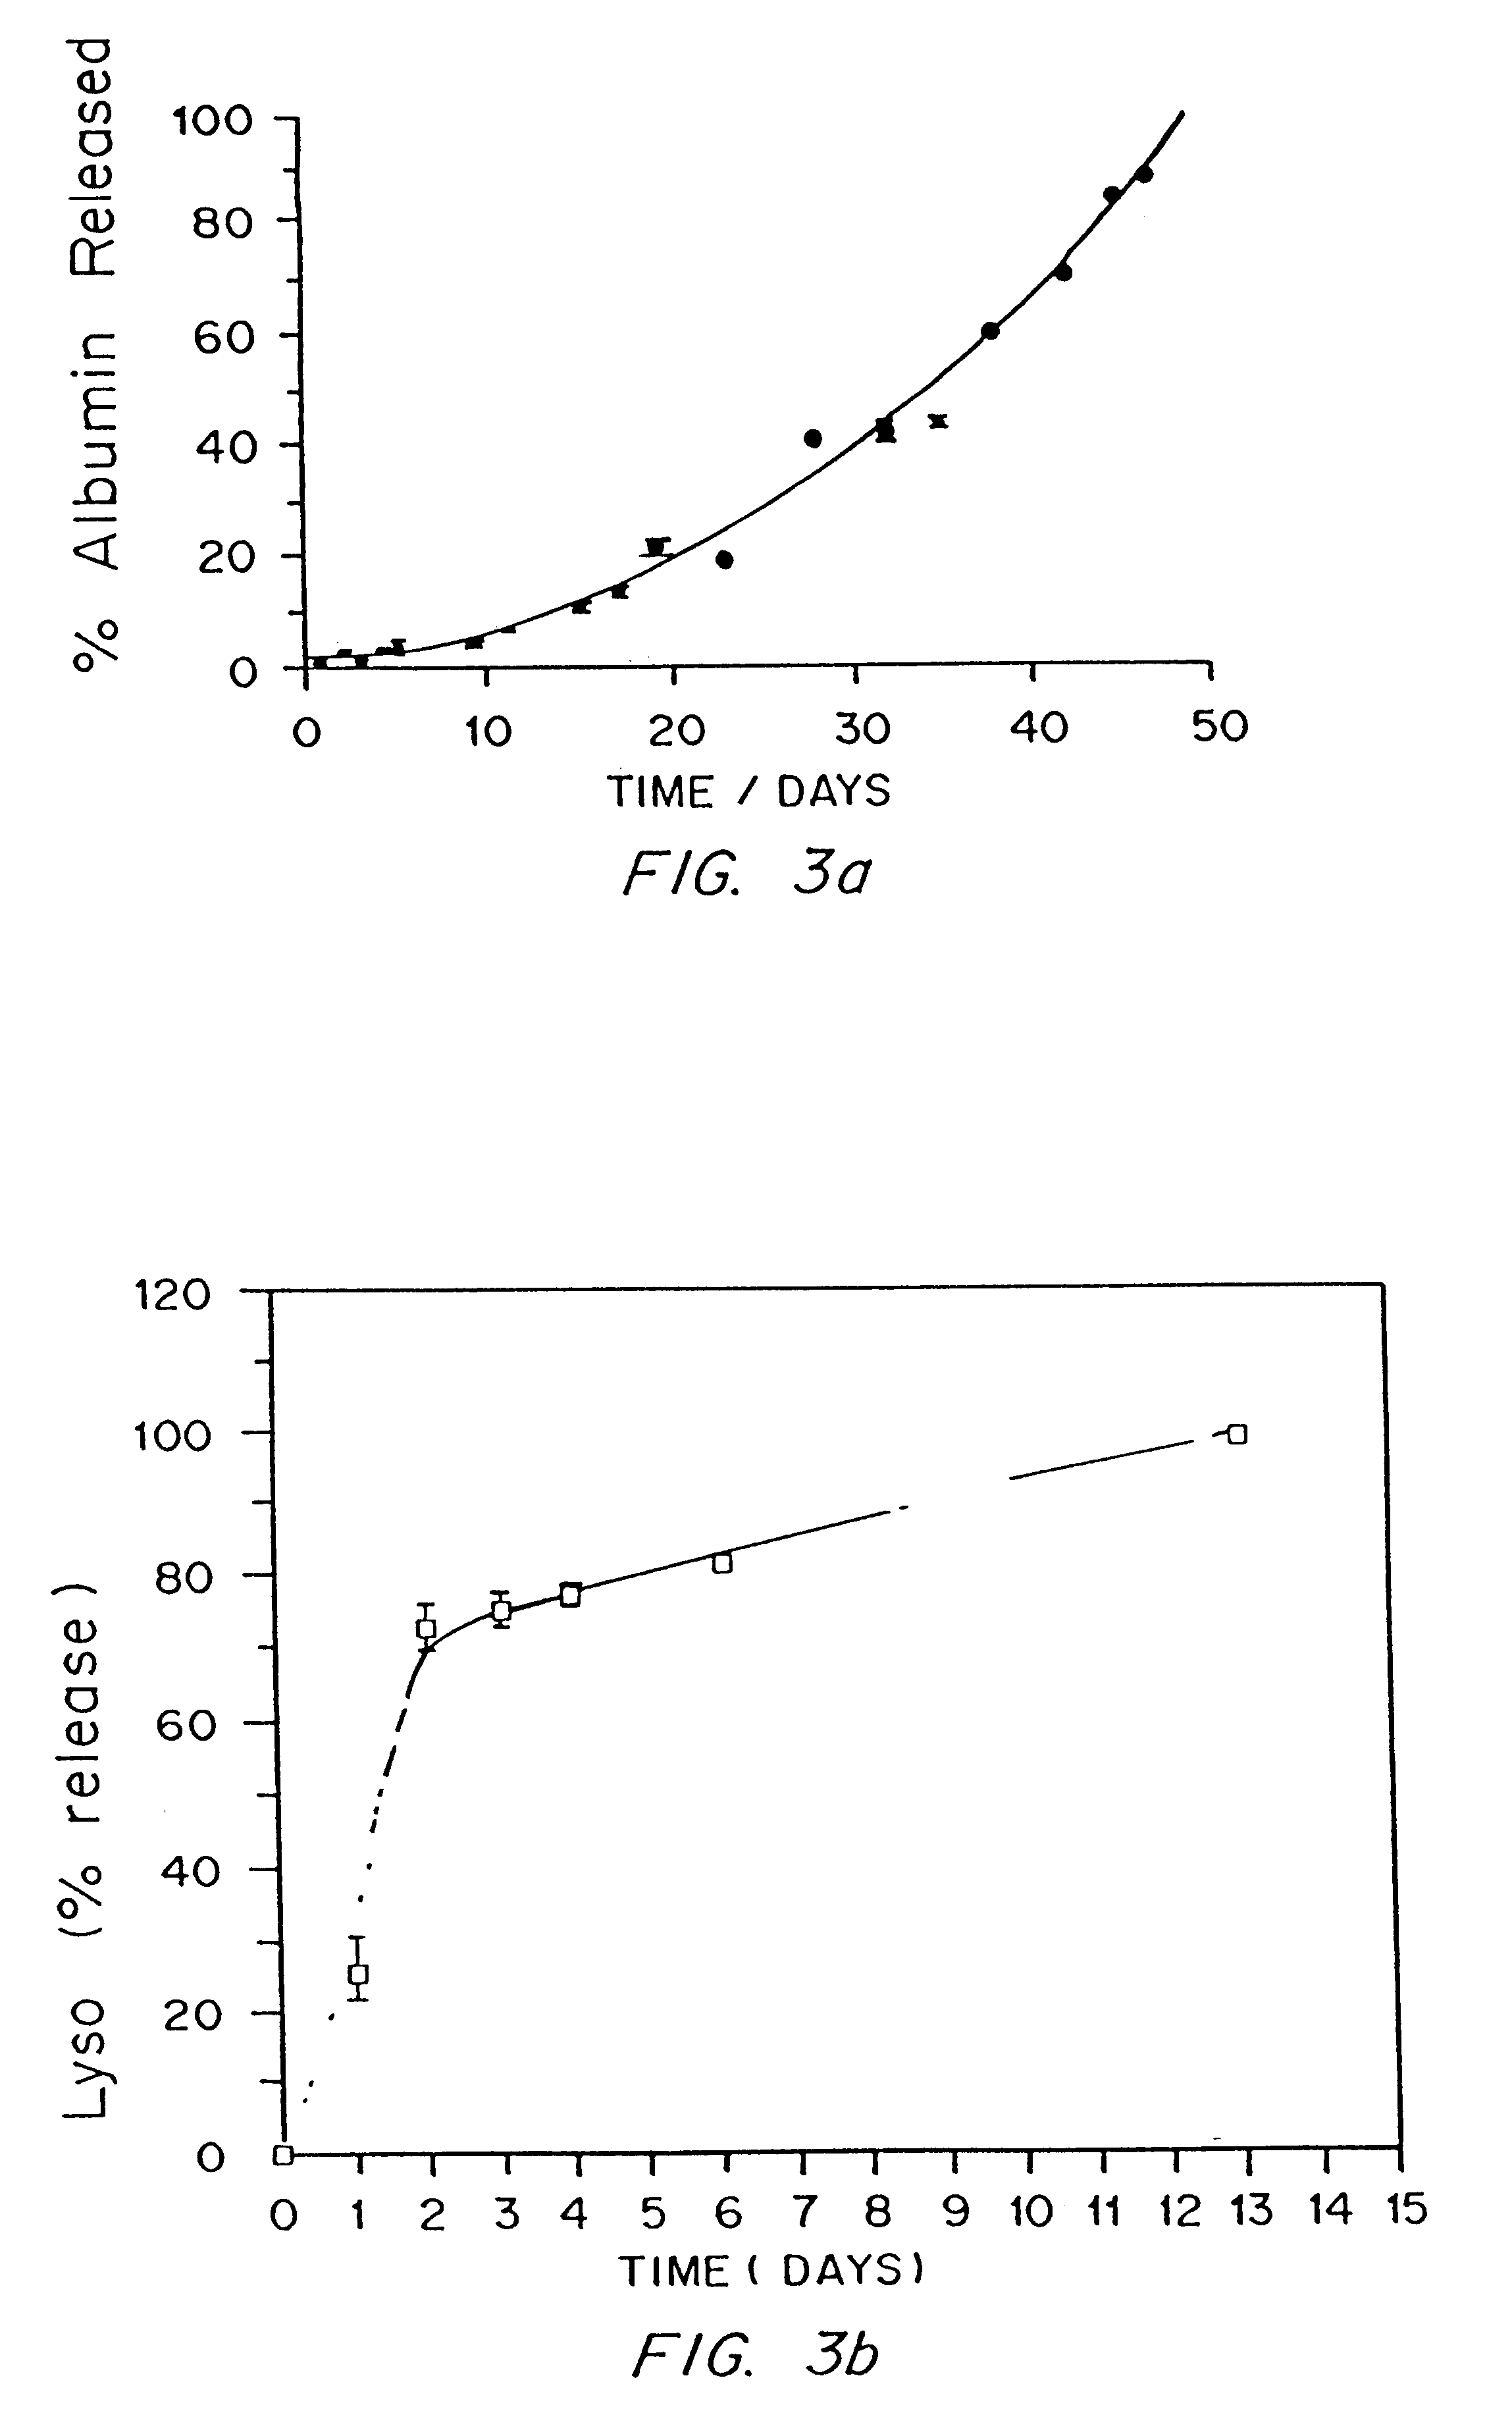 Photopolymerizable biodegradable hydrogels as tissue contacting materials and controlled-release carriers